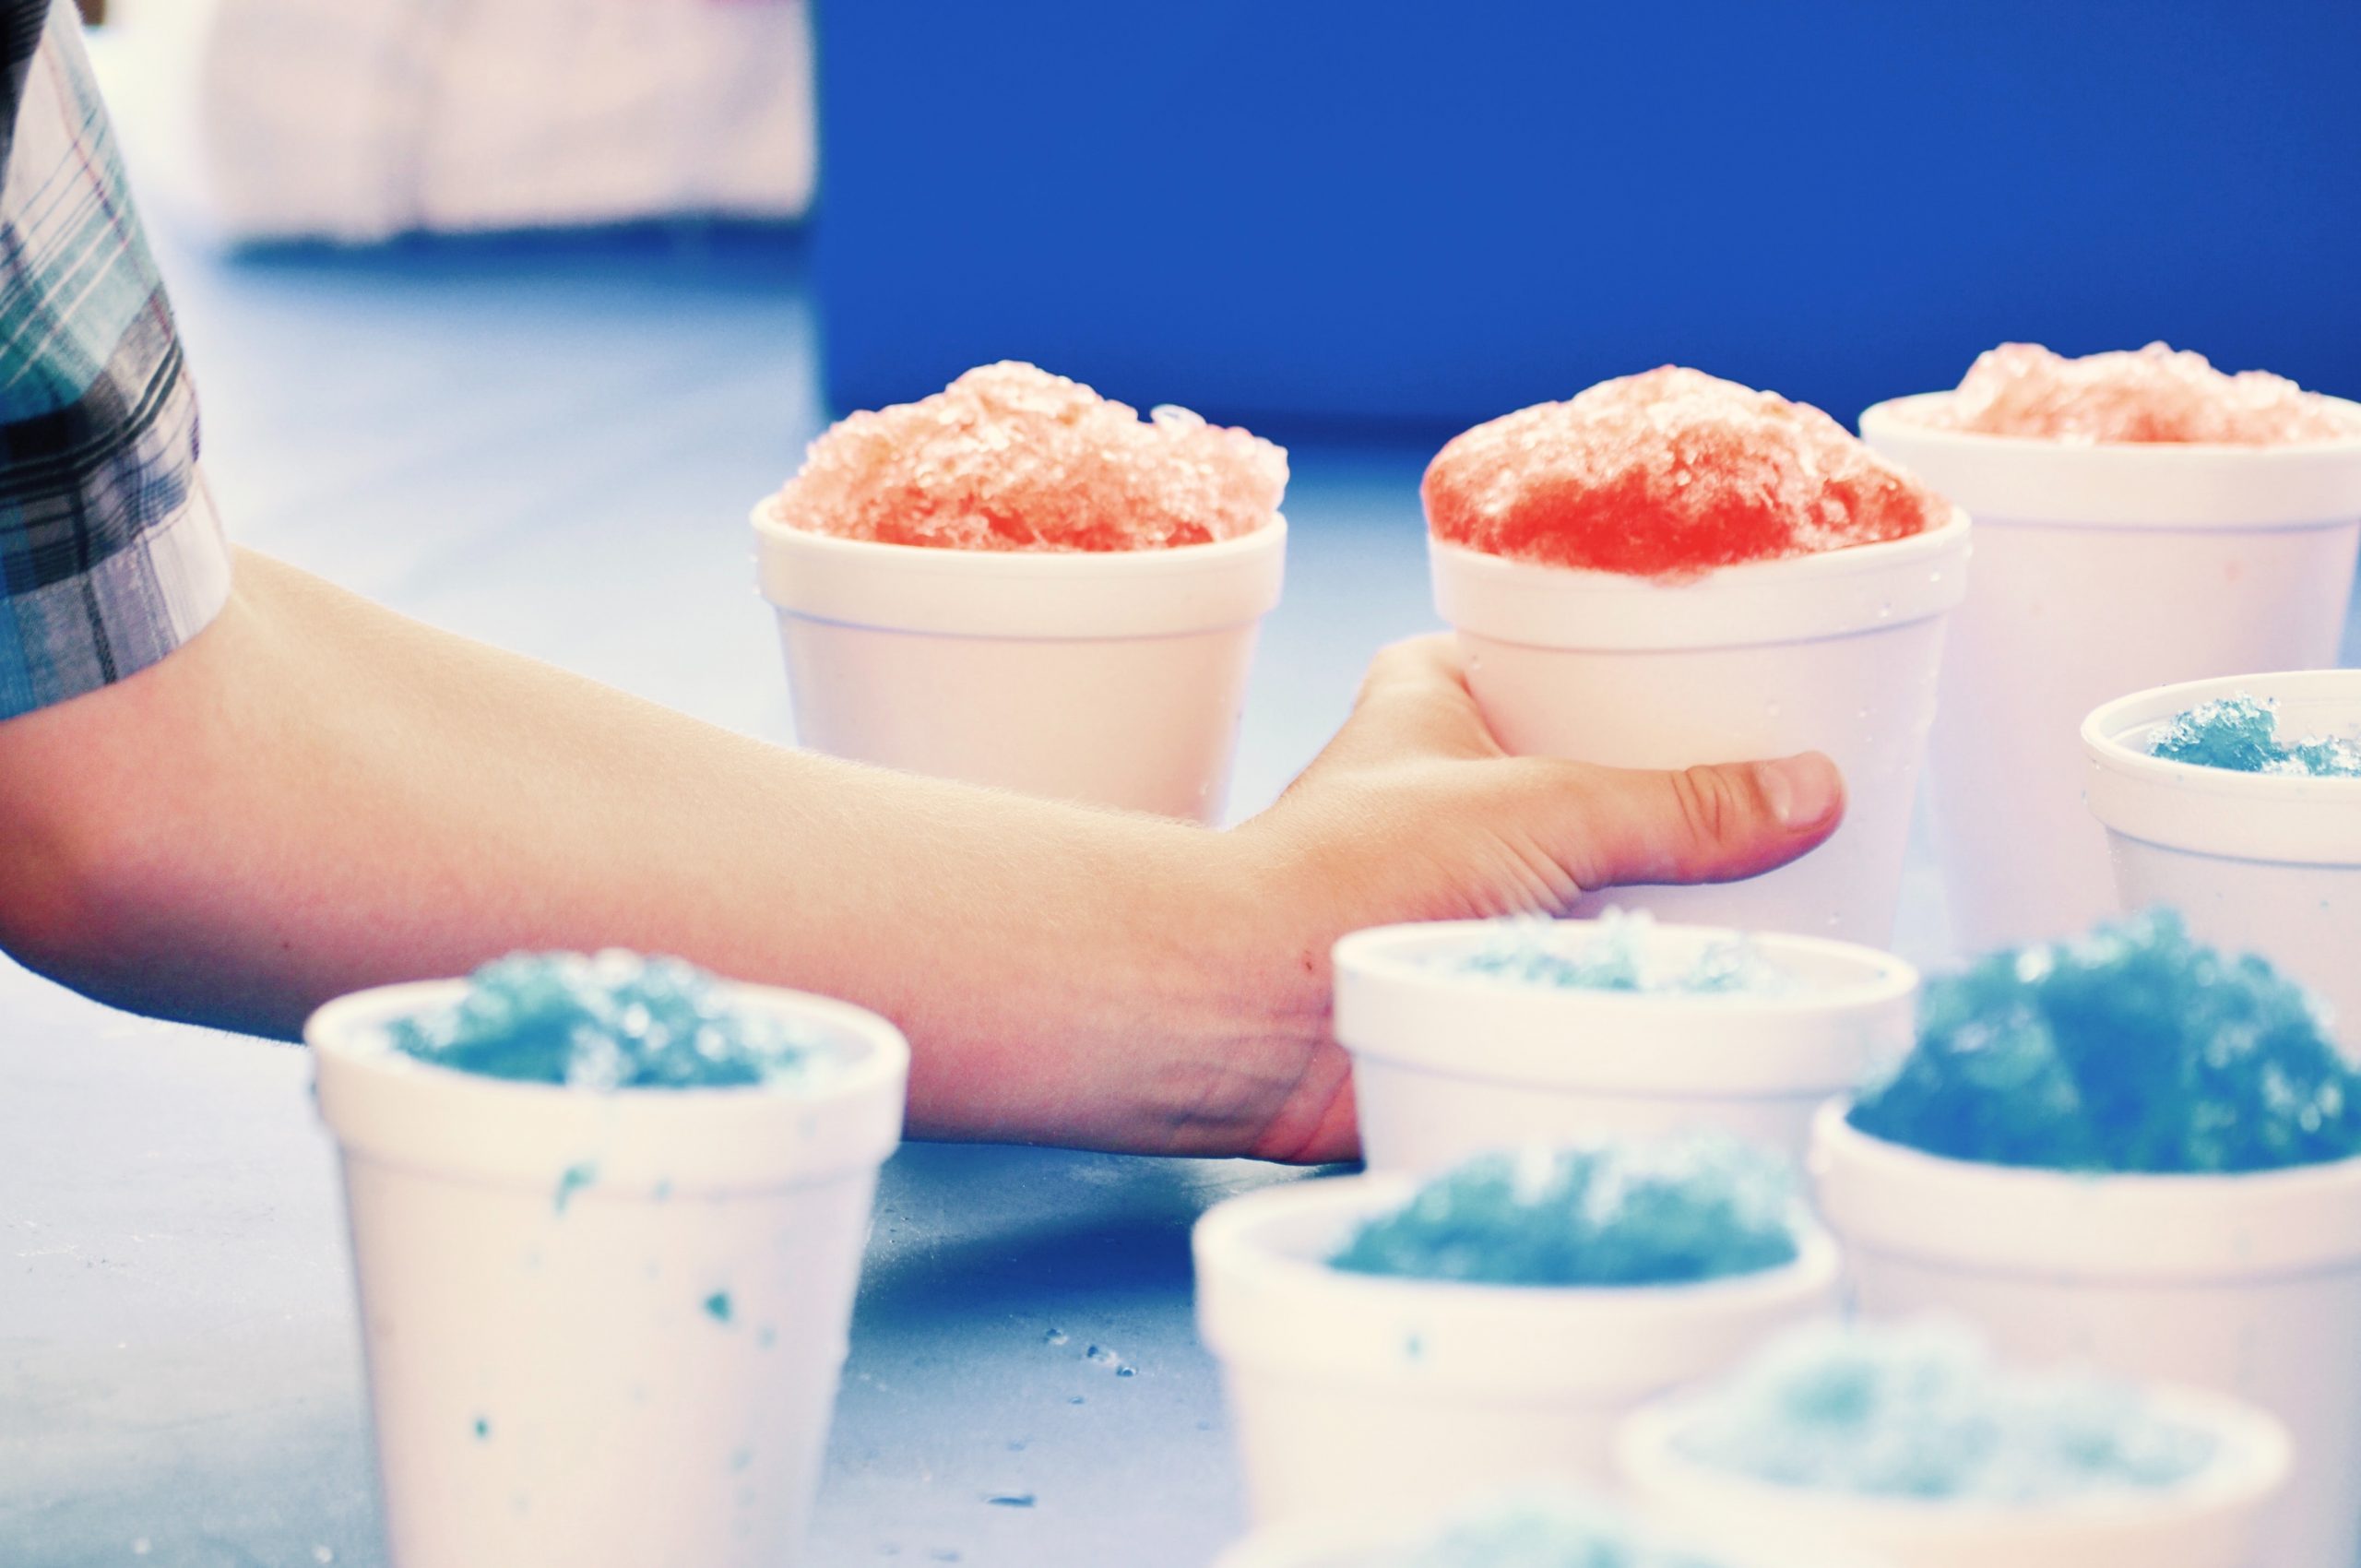 Multiple servings of Hawaiian shave ice sit on a table. A hand reaches in to grab a cherry flavored serving.